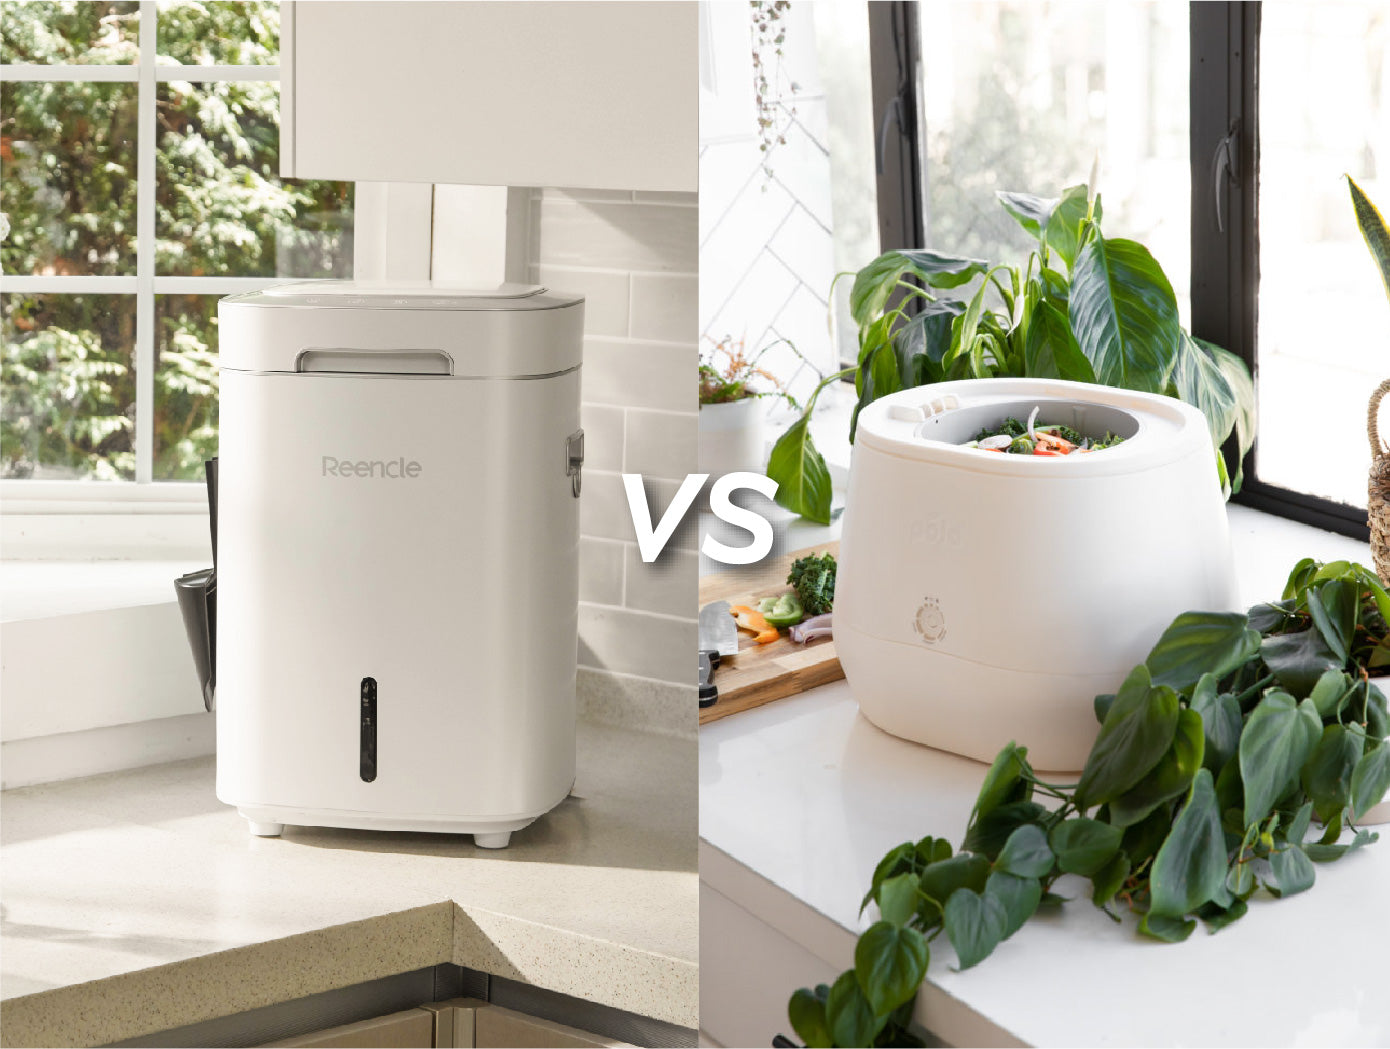 Reencle vs Lomi : Which food composter should you buy